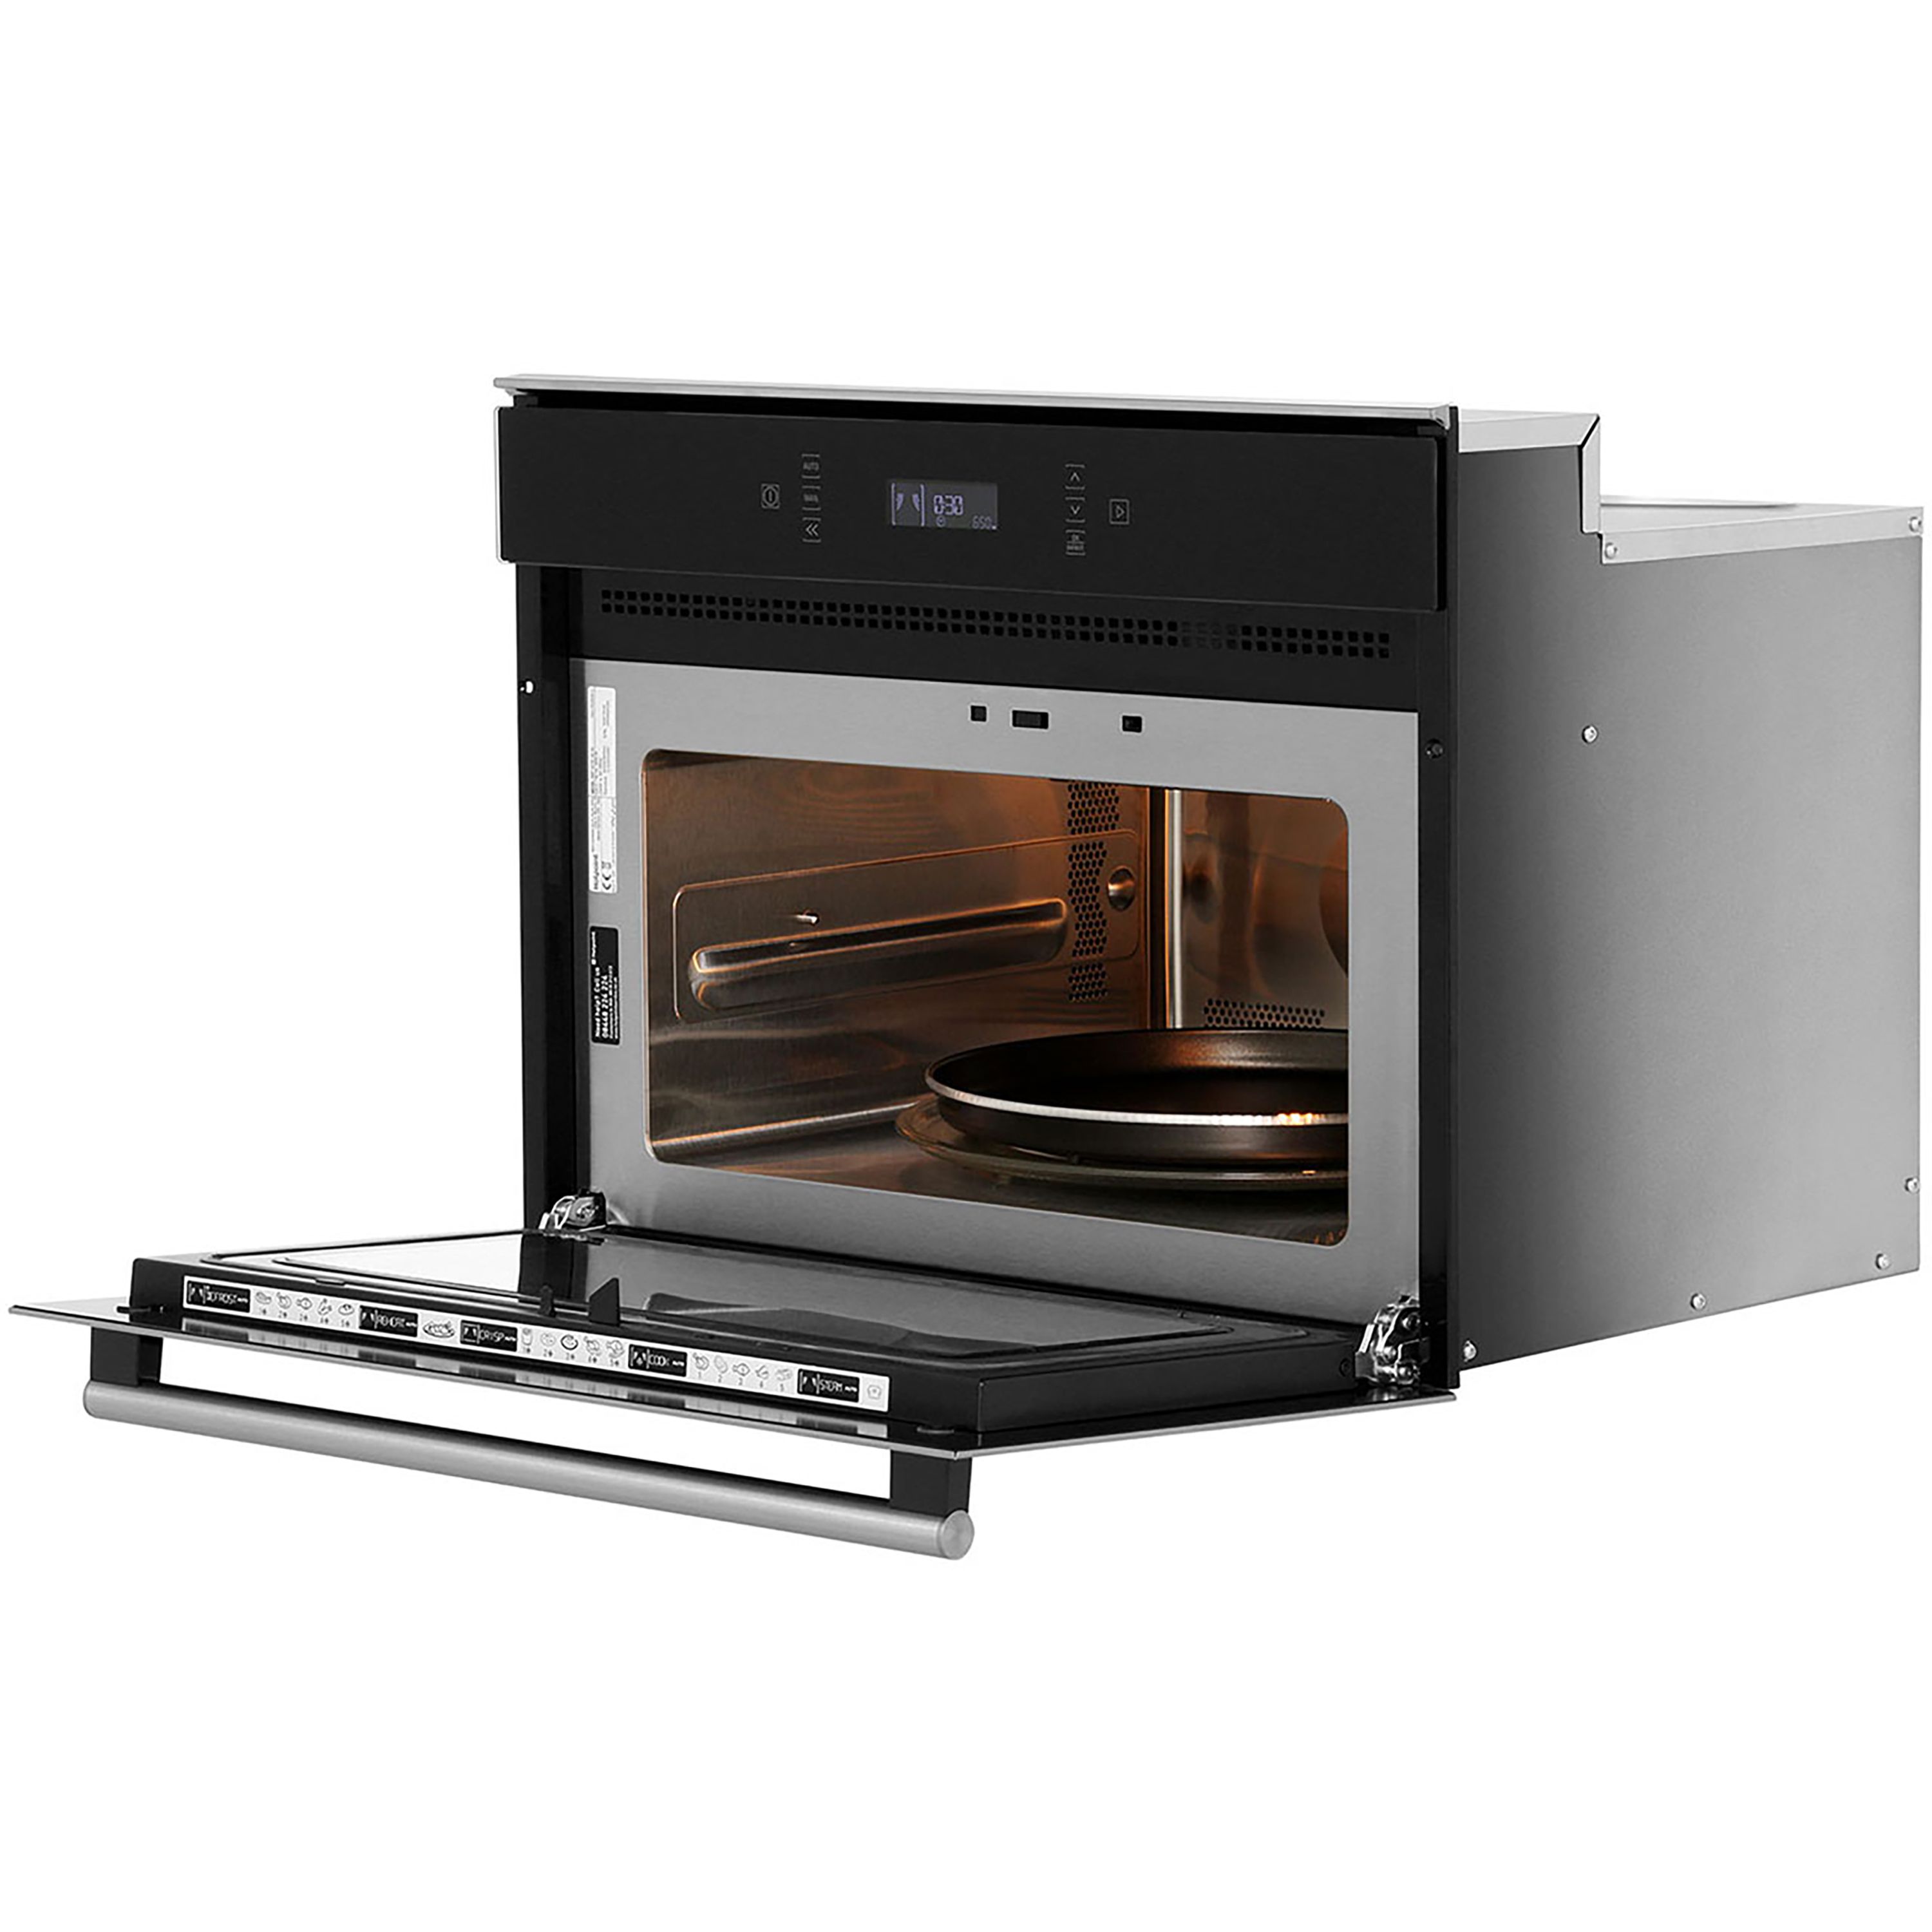 Hotpoint MP676IXH Built-in Single Oven with microwave - Stainless steel